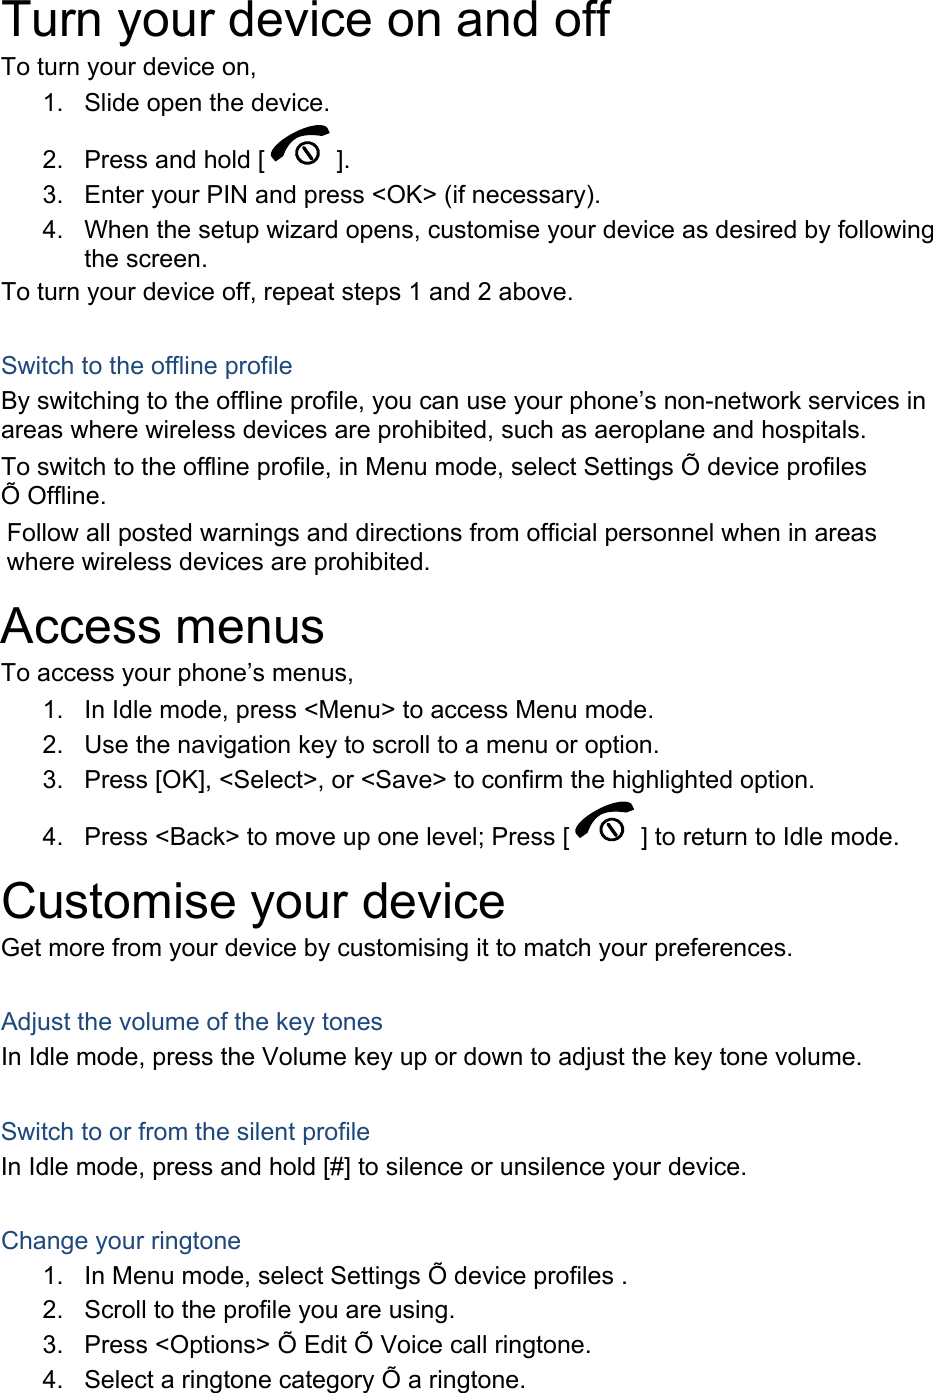 Turn your device on and off To turn your device on, 1. Slide open the device.2. Press and hold [ ]. 3. Enter your PIN and press &lt;OK&gt; (if necessary).4. When the setup wizard opens, customise your device as desired by followingthe screen.To turn your device off, repeat steps 1 and 2 above. Switch to the offline profile By switching to the offline profile, you can use your phone’s non-network services in areas where wireless devices are prohibited, such as aeroplane and hospitals. To switch to the offline profile, in Menu mode, select Settings Õ device profiles Õ Offline. Follow all posted warnings and directions from official personnel when in areas where wireless devices are prohibited. Access menus To access your phone’s menus, 1. In Idle mode, press &lt;Menu&gt; to access Menu mode.2. Use the navigation key to scroll to a menu or option.3. Press [OK], &lt;Select&gt;, or &lt;Save&gt; to confirm the highlighted option.4. Press &lt;Back&gt; to move up one level; Press [ ] to return to Idle mode. Customise your device Get more from your device by customising it to match your preferences. Adjust the volume of the key tones In Idle mode, press the Volume key up or down to adjust the key tone volume. Switch to or from the silent profile In Idle mode, press and hold [#] to silence or unsilence your device. Change your ringtone 1. In Menu mode, select Settings Õ device profiles .2. Scroll to the profile you are using.3. Press &lt;Options&gt; Õ Edit Õ Voice call ringtone.4. Select a ringtone category Õ a ringtone.